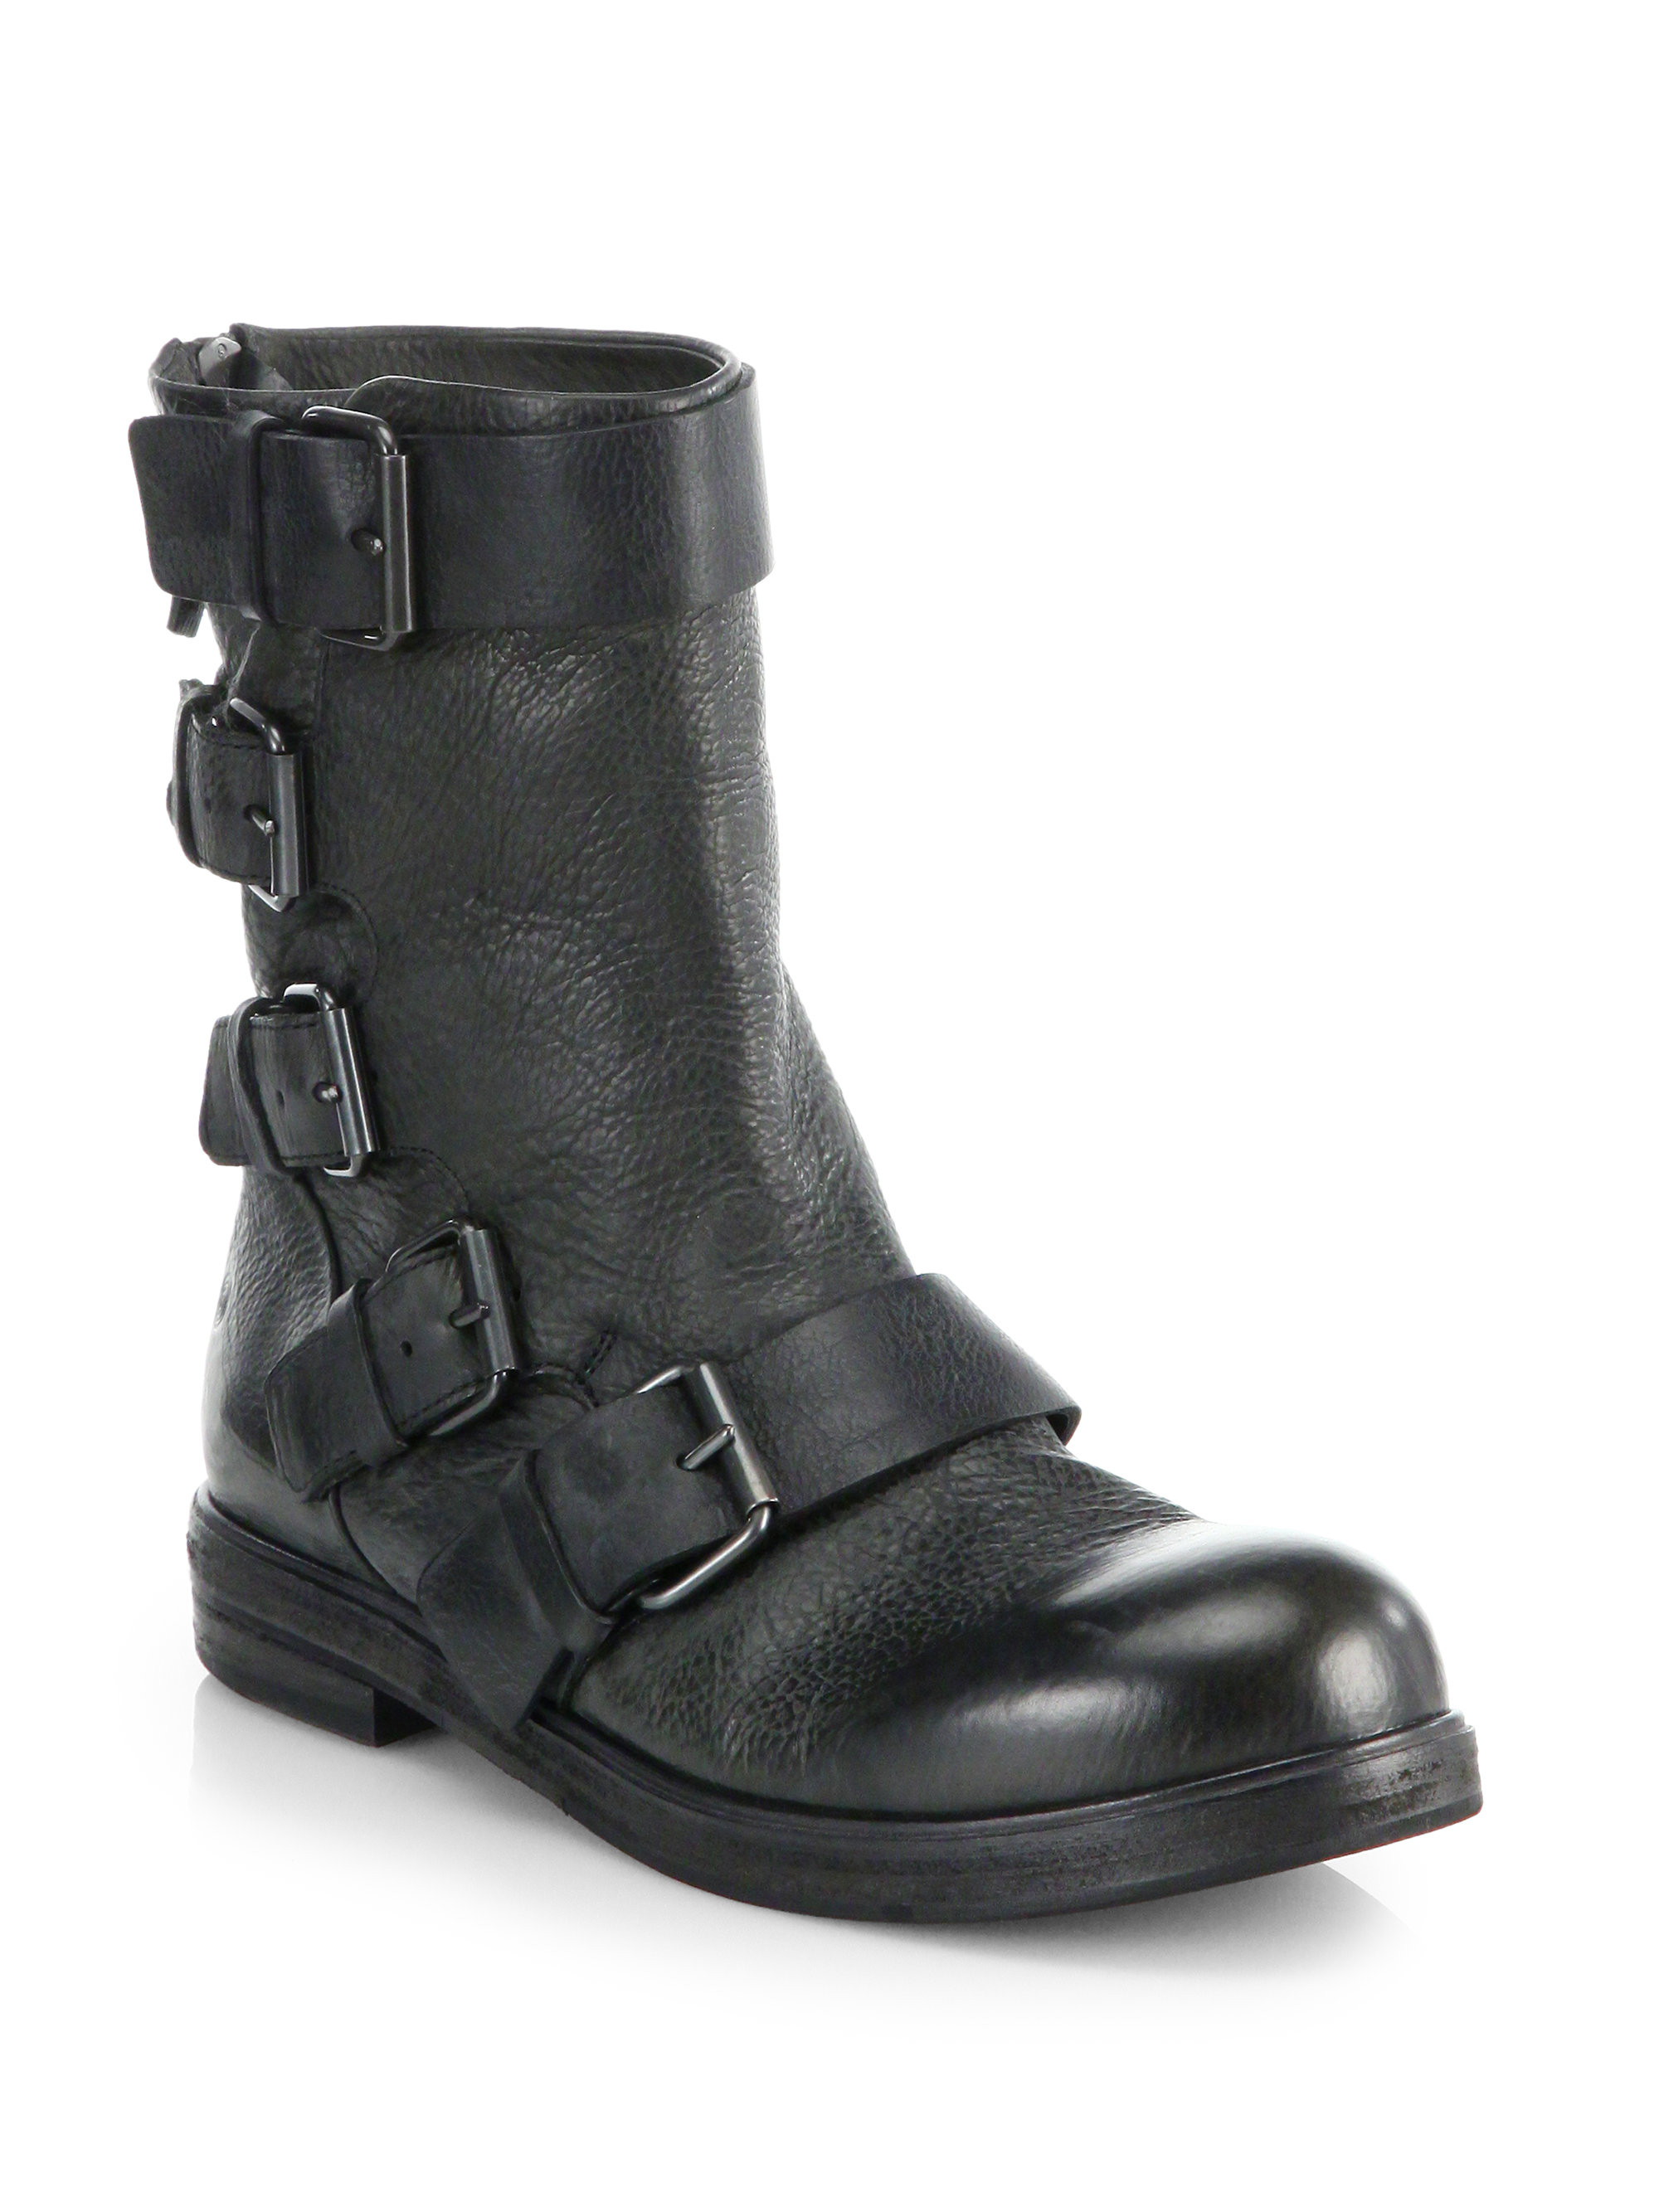 Marsell Buckled Leather Mid-Calf Moto Boots in Black | Lyst